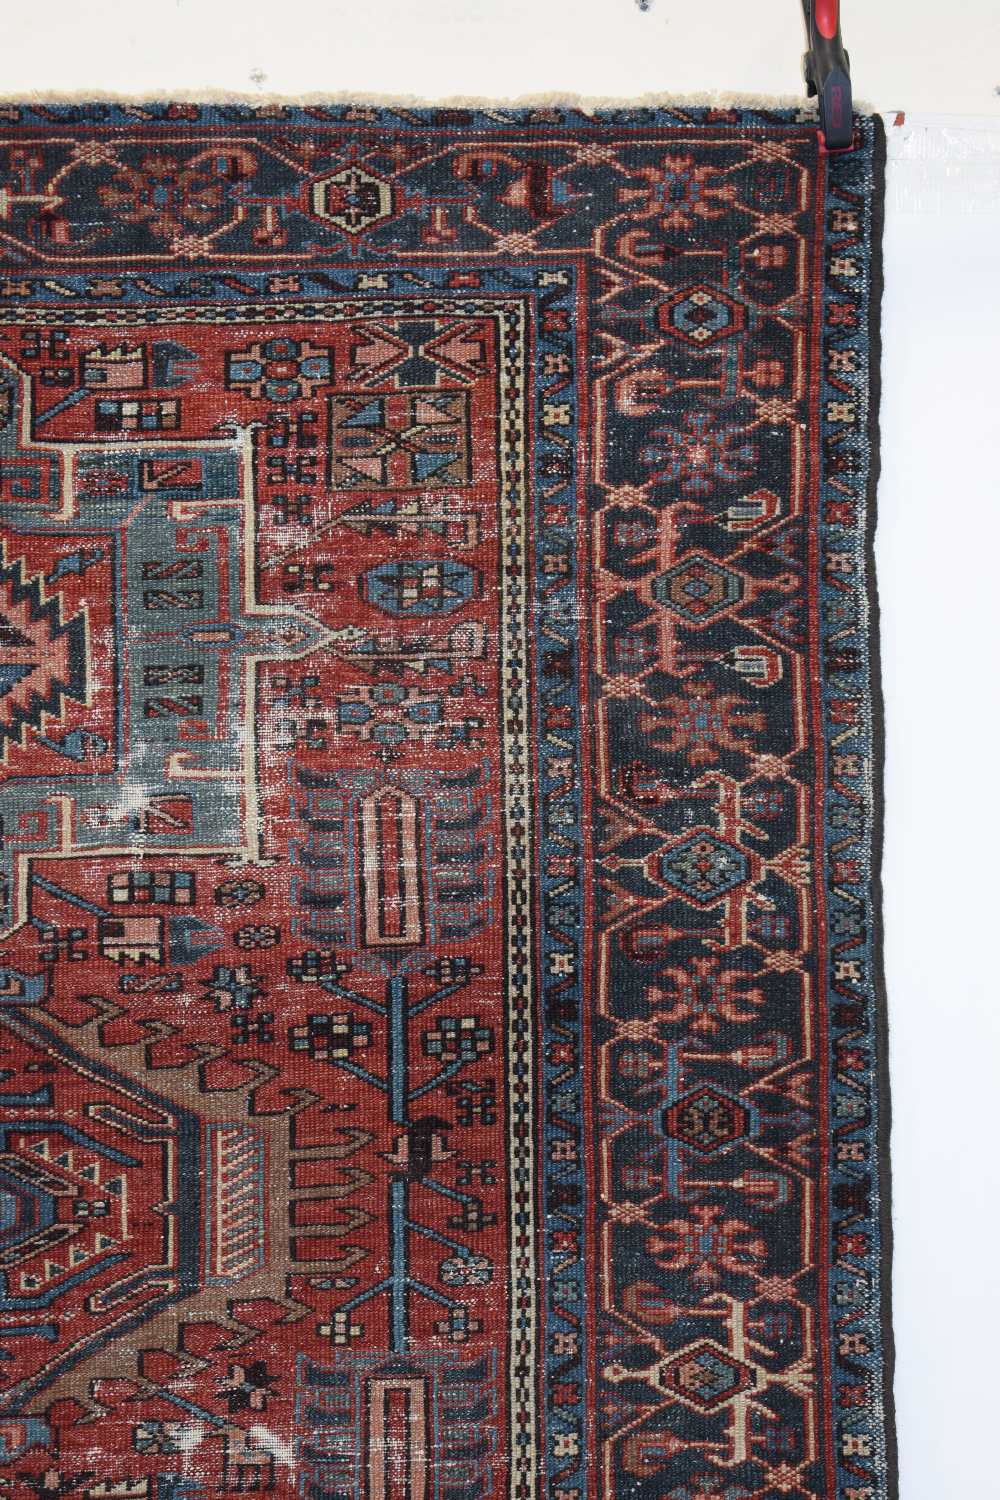 Karaja rug, north west Persia, circa 1930s-40s, 5ft. 11in. X 4ft. 11in. 1.80m. X 1.50m. Overall - Image 3 of 9